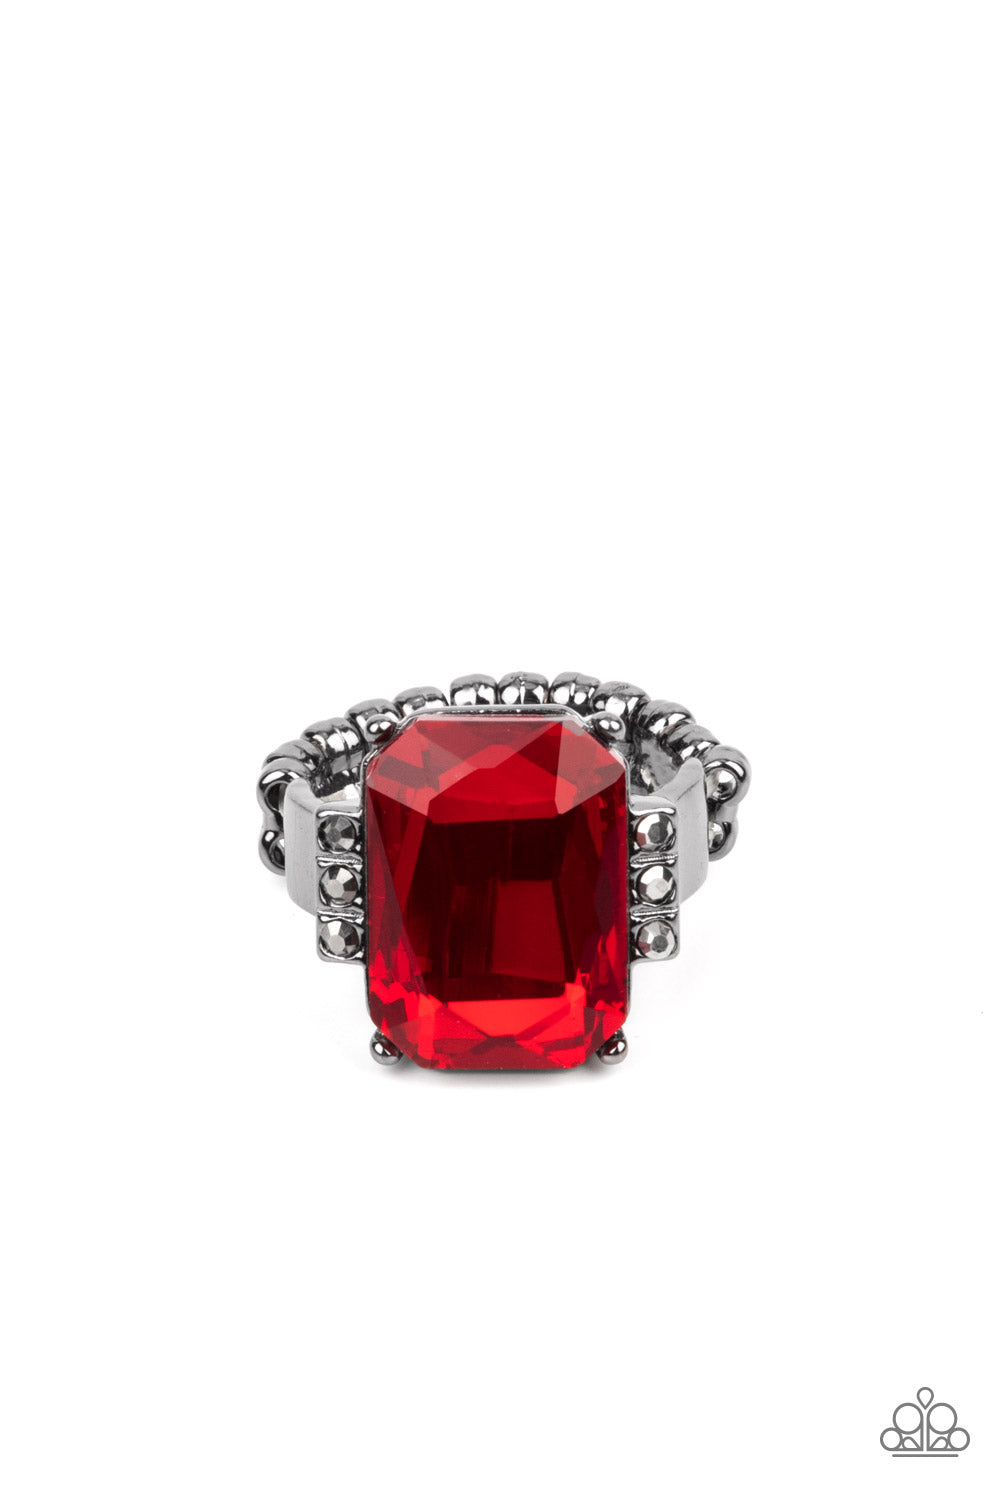 Epic Proportions Red Ring - Paparazzi Accessories  Flanked by stacks of dainty hematite rhinestones, an oversized fiery red emerald cut gem is pressed into the center of a sleek gunmetal frame, resulting in a dramatic centerpiece atop the finger. Features a dainty stretchy band for a flexible fit.  Sold as one individual ring.